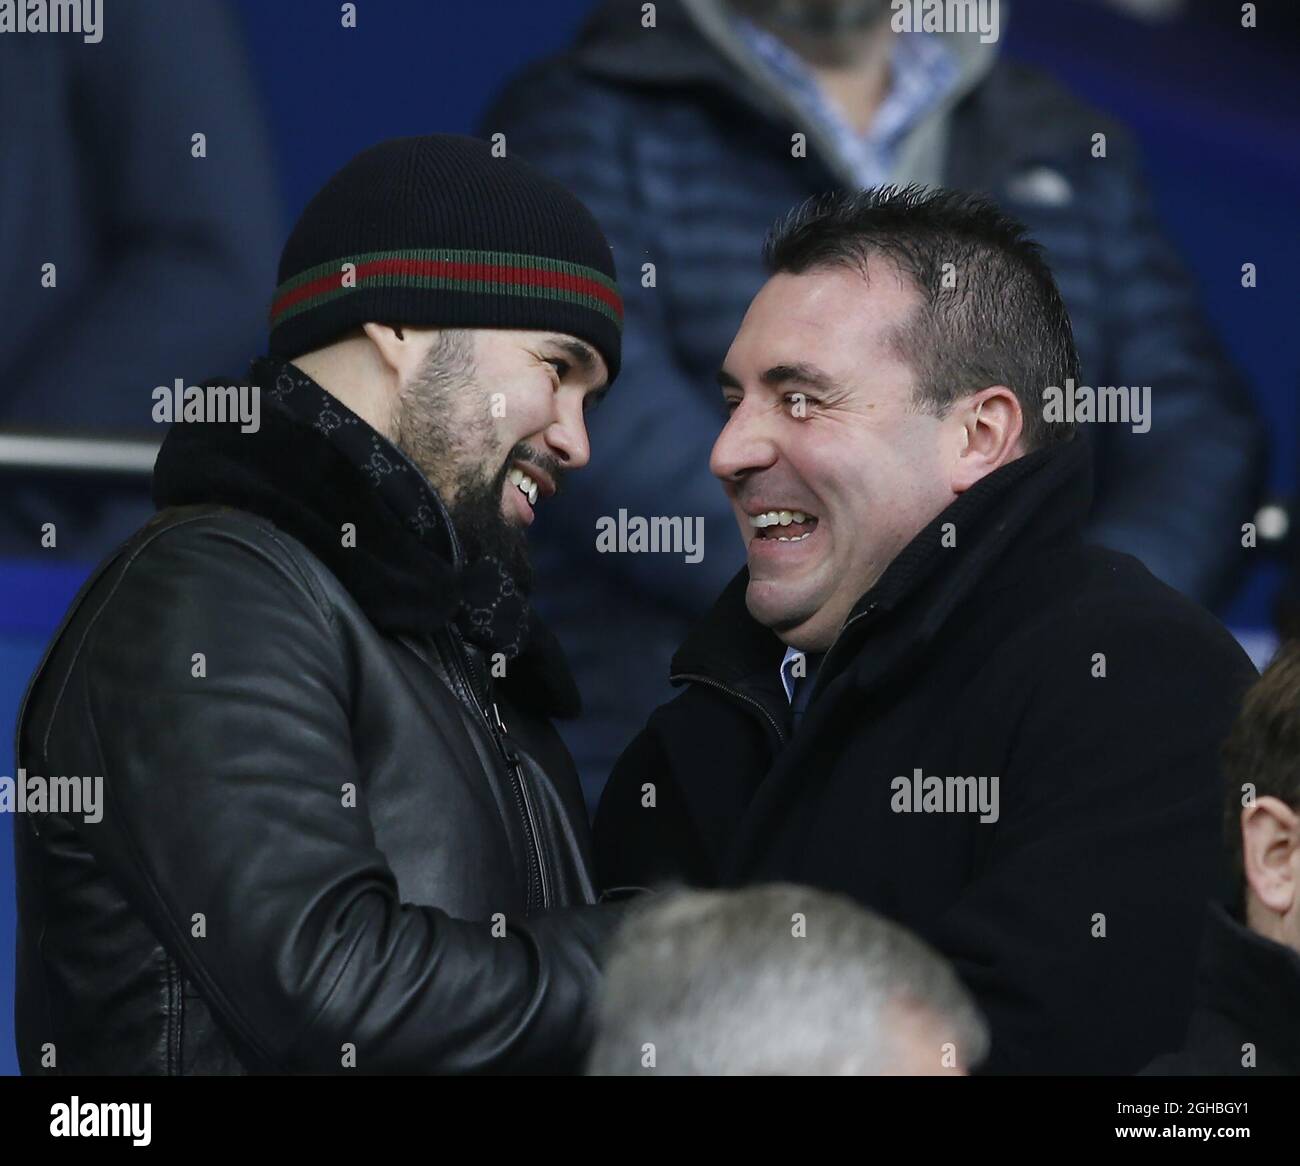 Everton U23 manager David Unsworth with Everton supporting boxer Tony Bellew during the premier league match at the Goodison Park Stadium, Liverpool. Picture date 22nd October 2017. Picture credit should read: Simon Bellis/Sportimage via PA Images Stock Photo